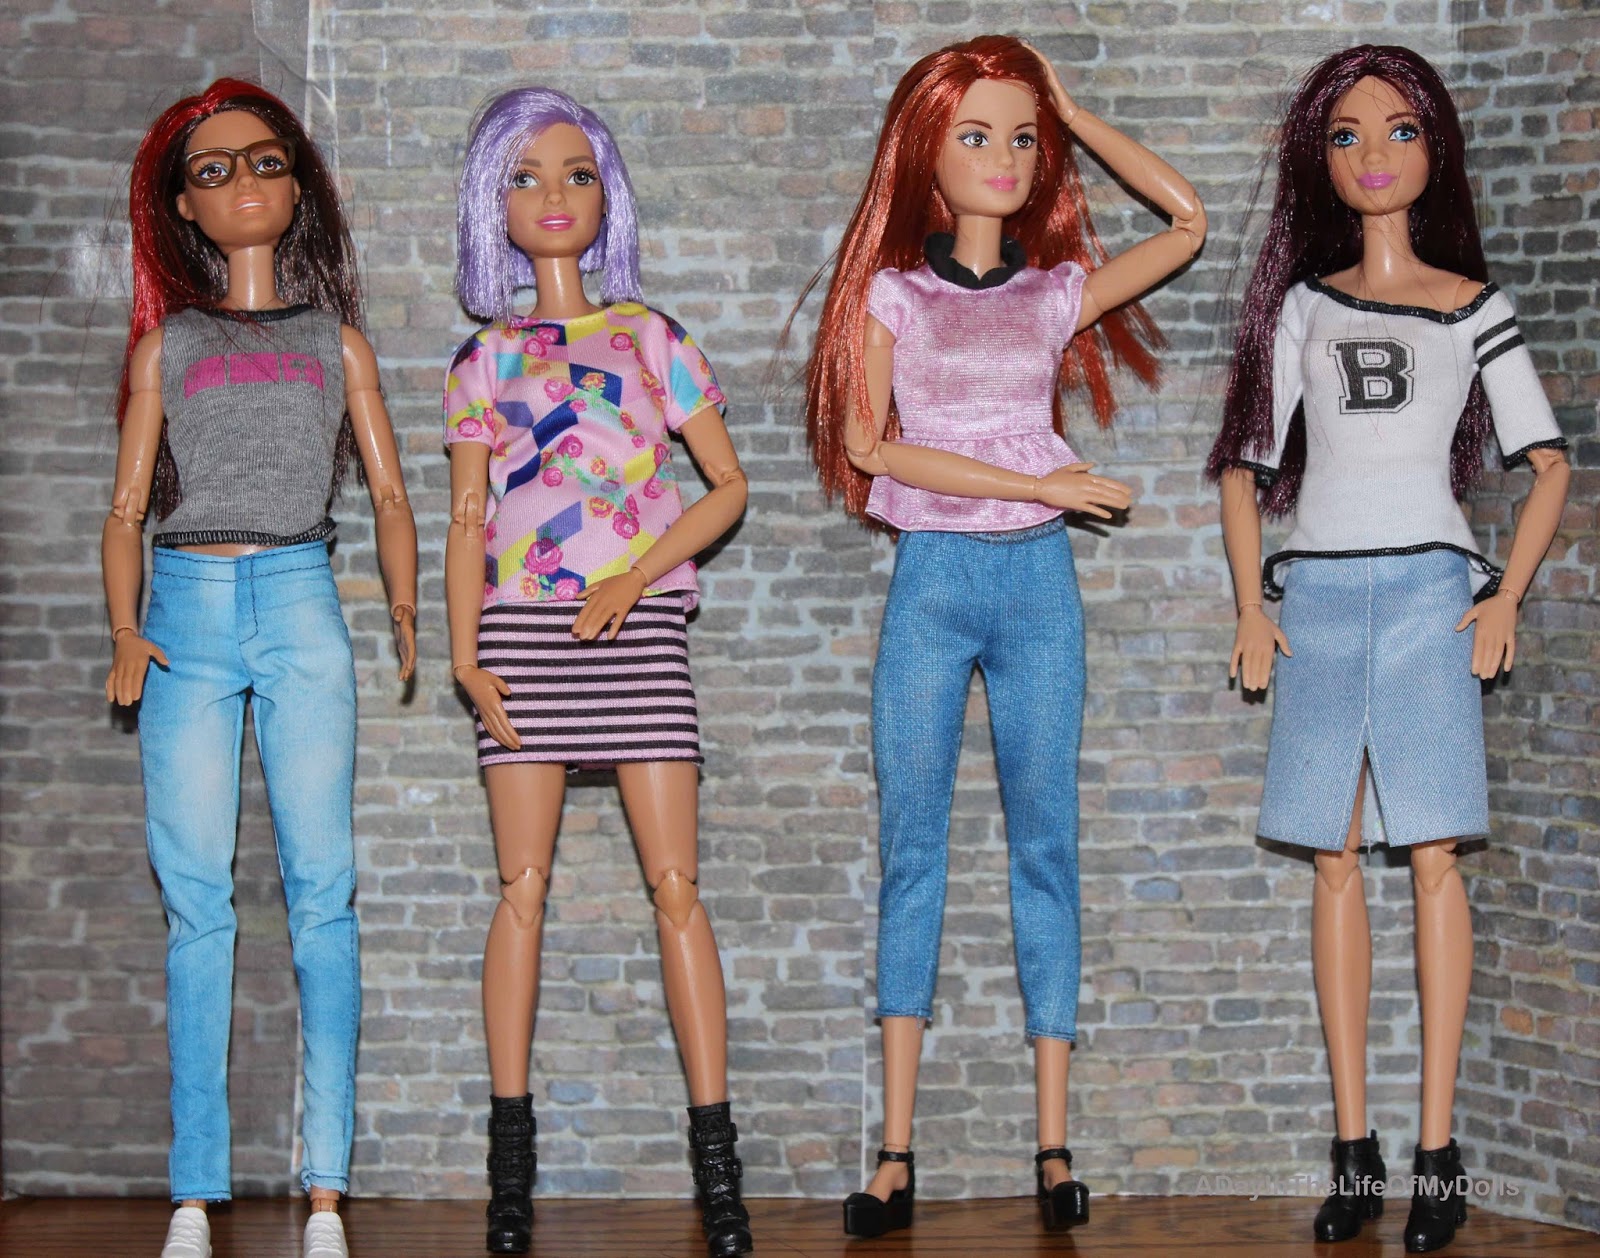 A The Of Dolls: Fashionistas Galore!